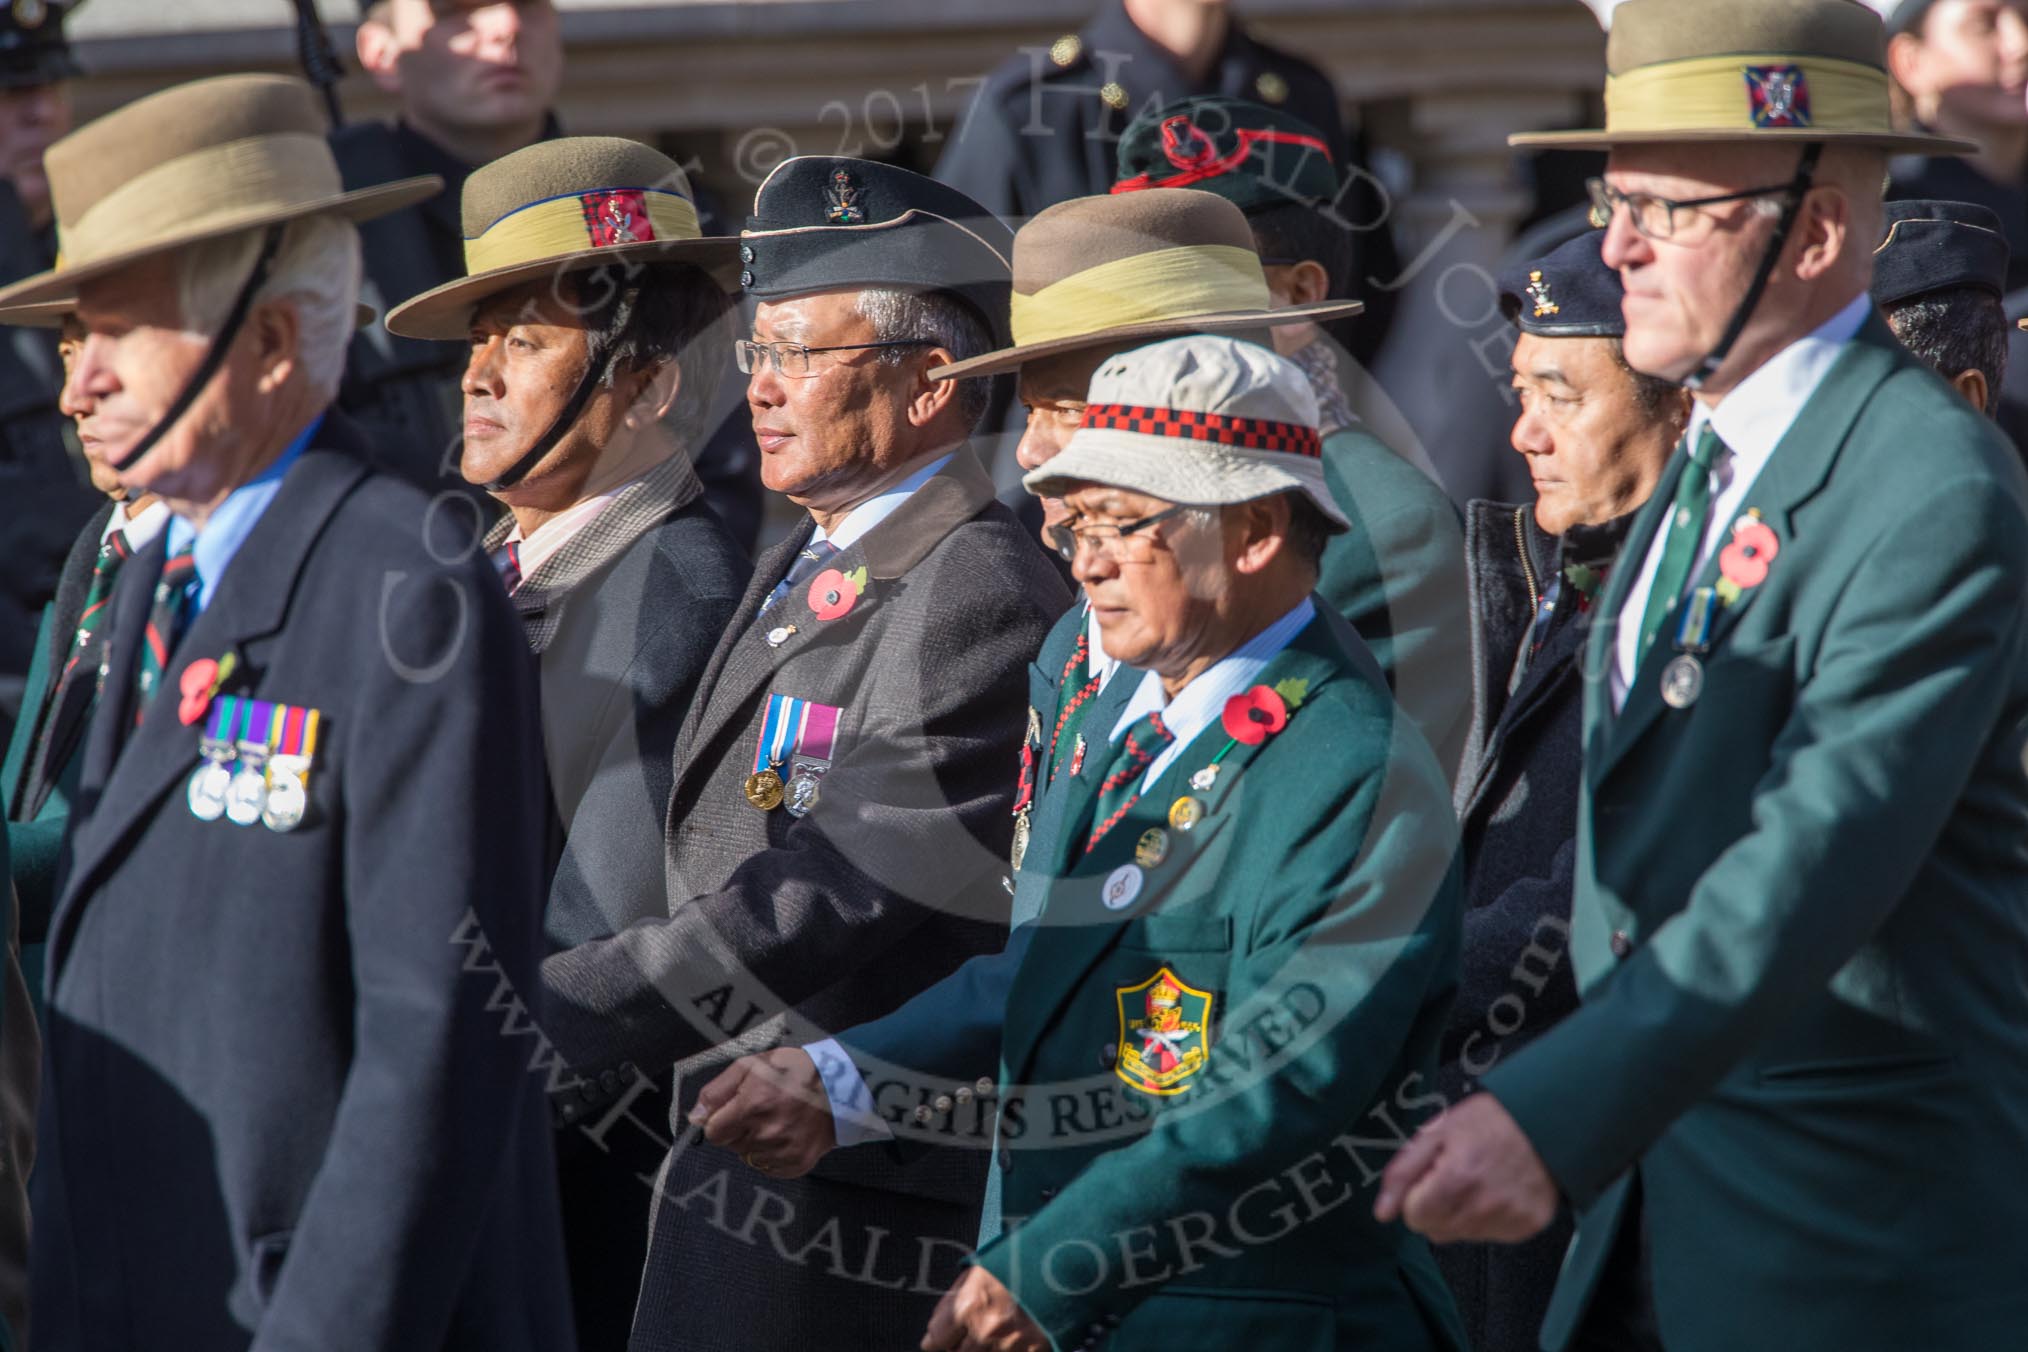 Gurkha Brigade Association (Group A25, 80 members) during the Royal British Legion March Past on Remembrance Sunday at the Cenotaph, Whitehall, Westminster, London, 11 November 2018, 12:00.